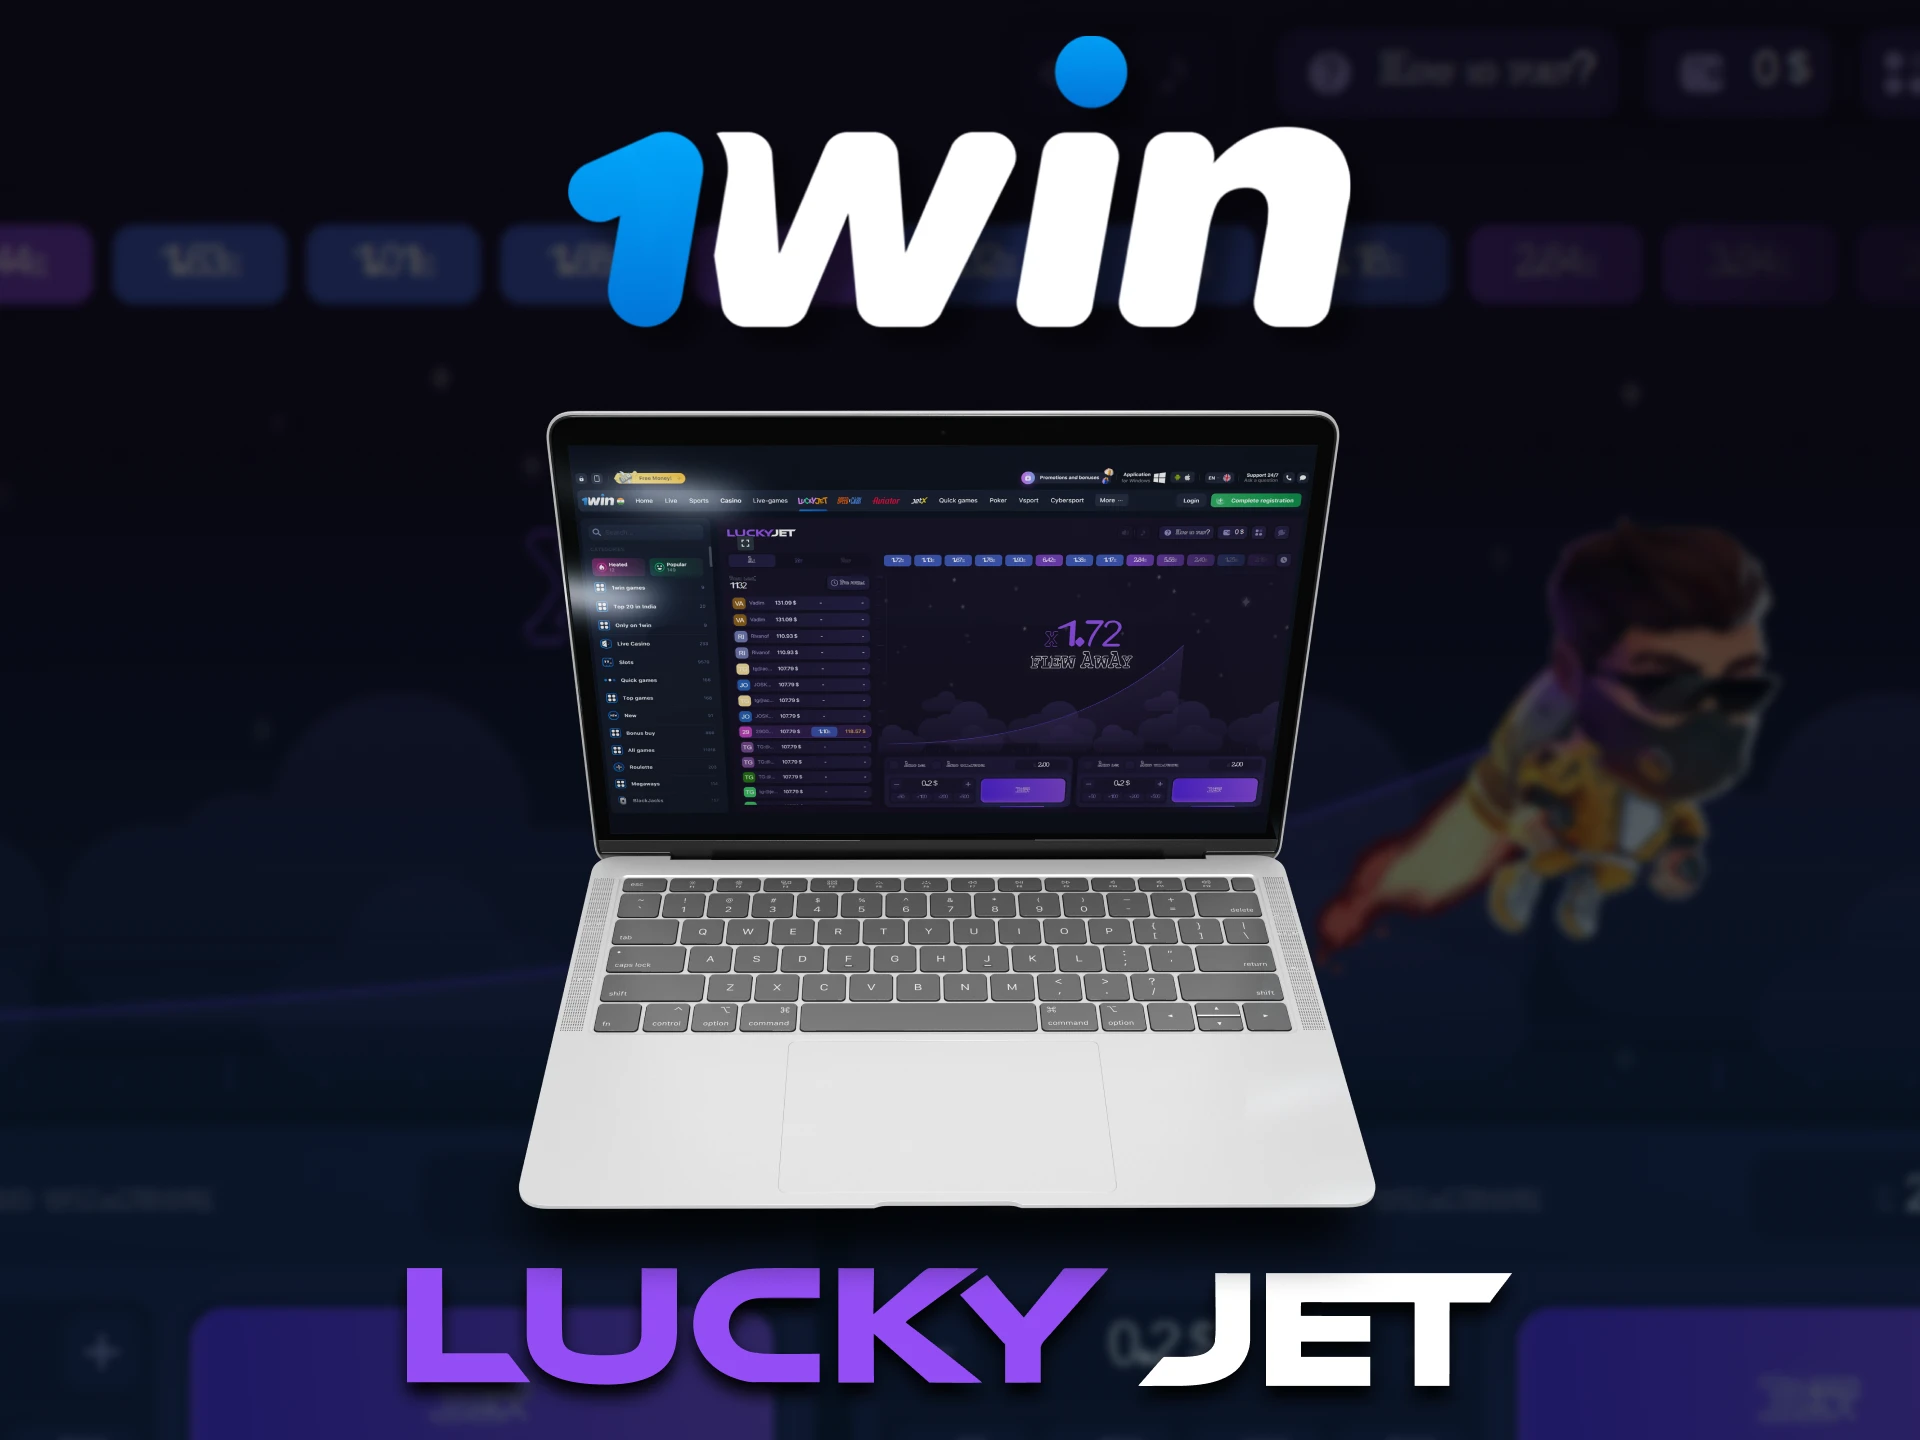 On 1win you can play games like Lucky Jet.